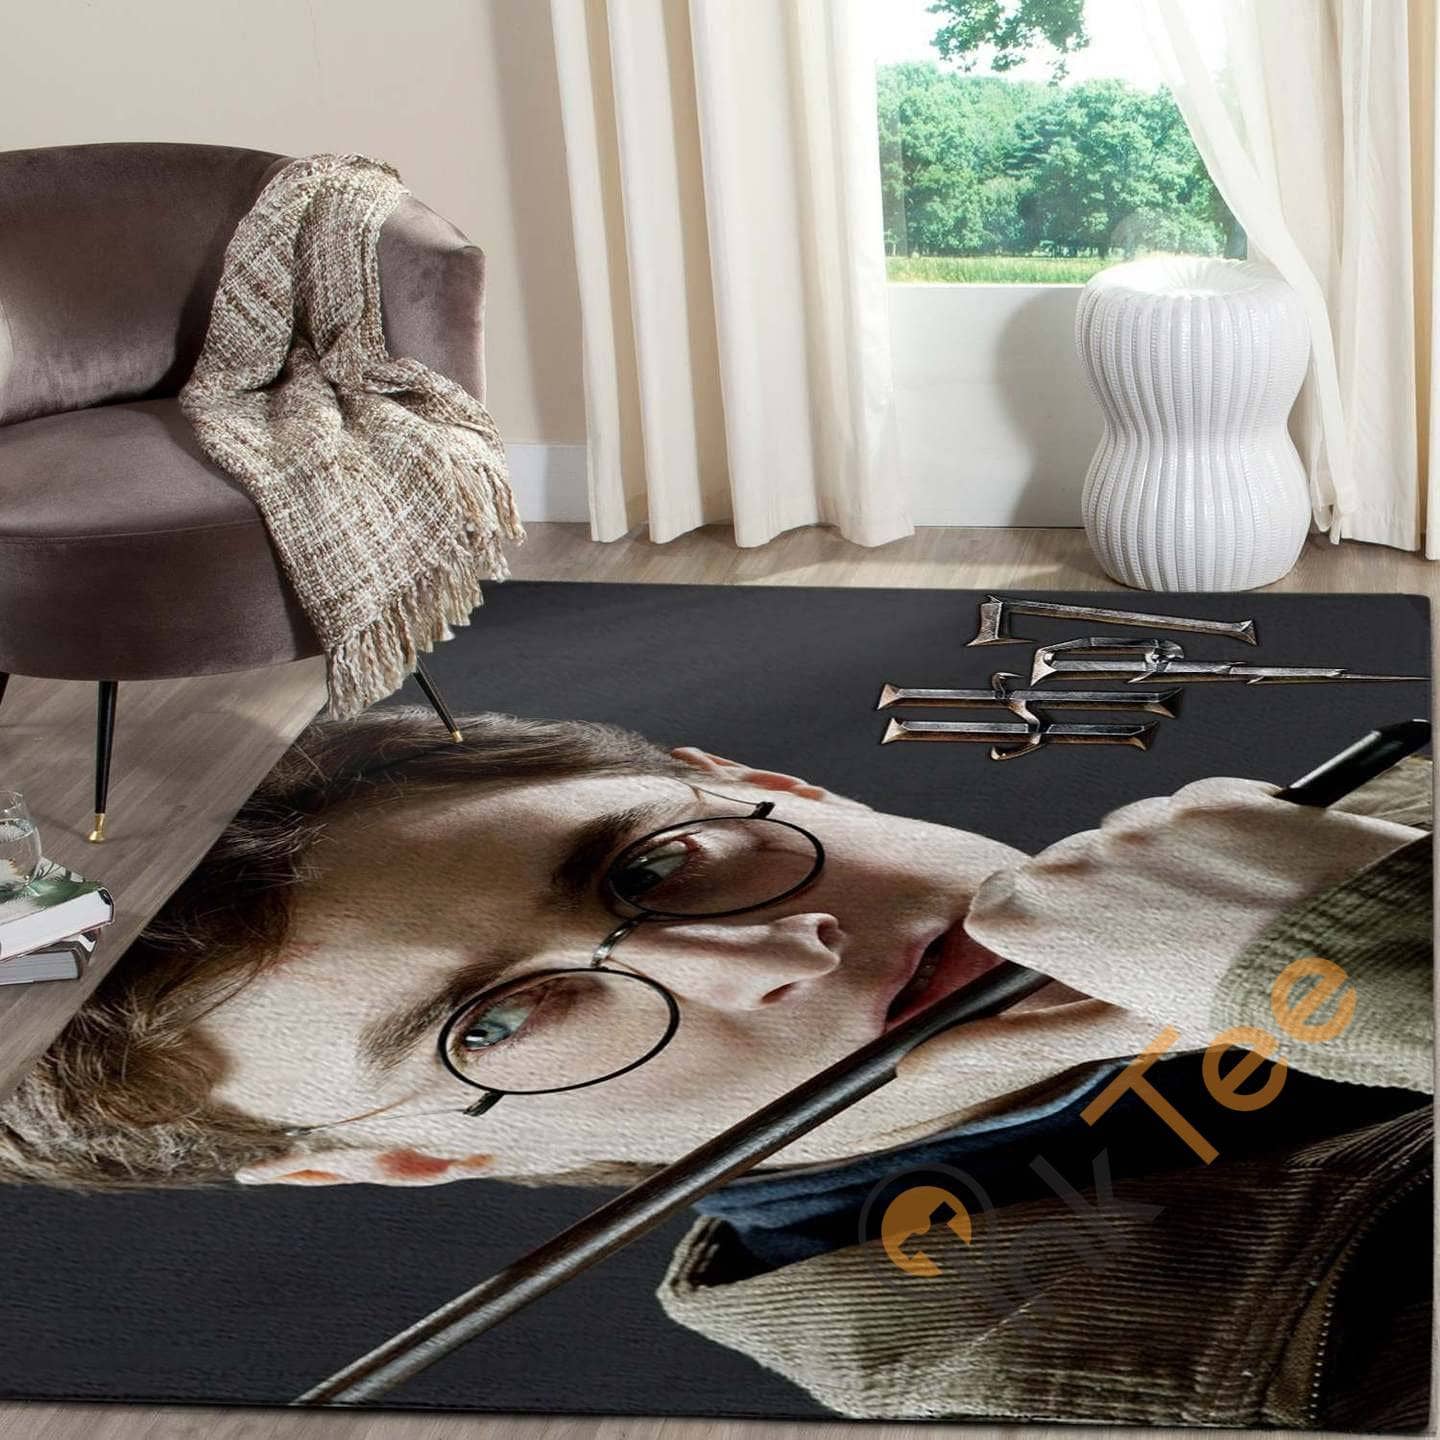 Harry Potter And Magic Wand Carpet Living Room Floor Decor Gift For Potter's Fan Collection Hermione Rug